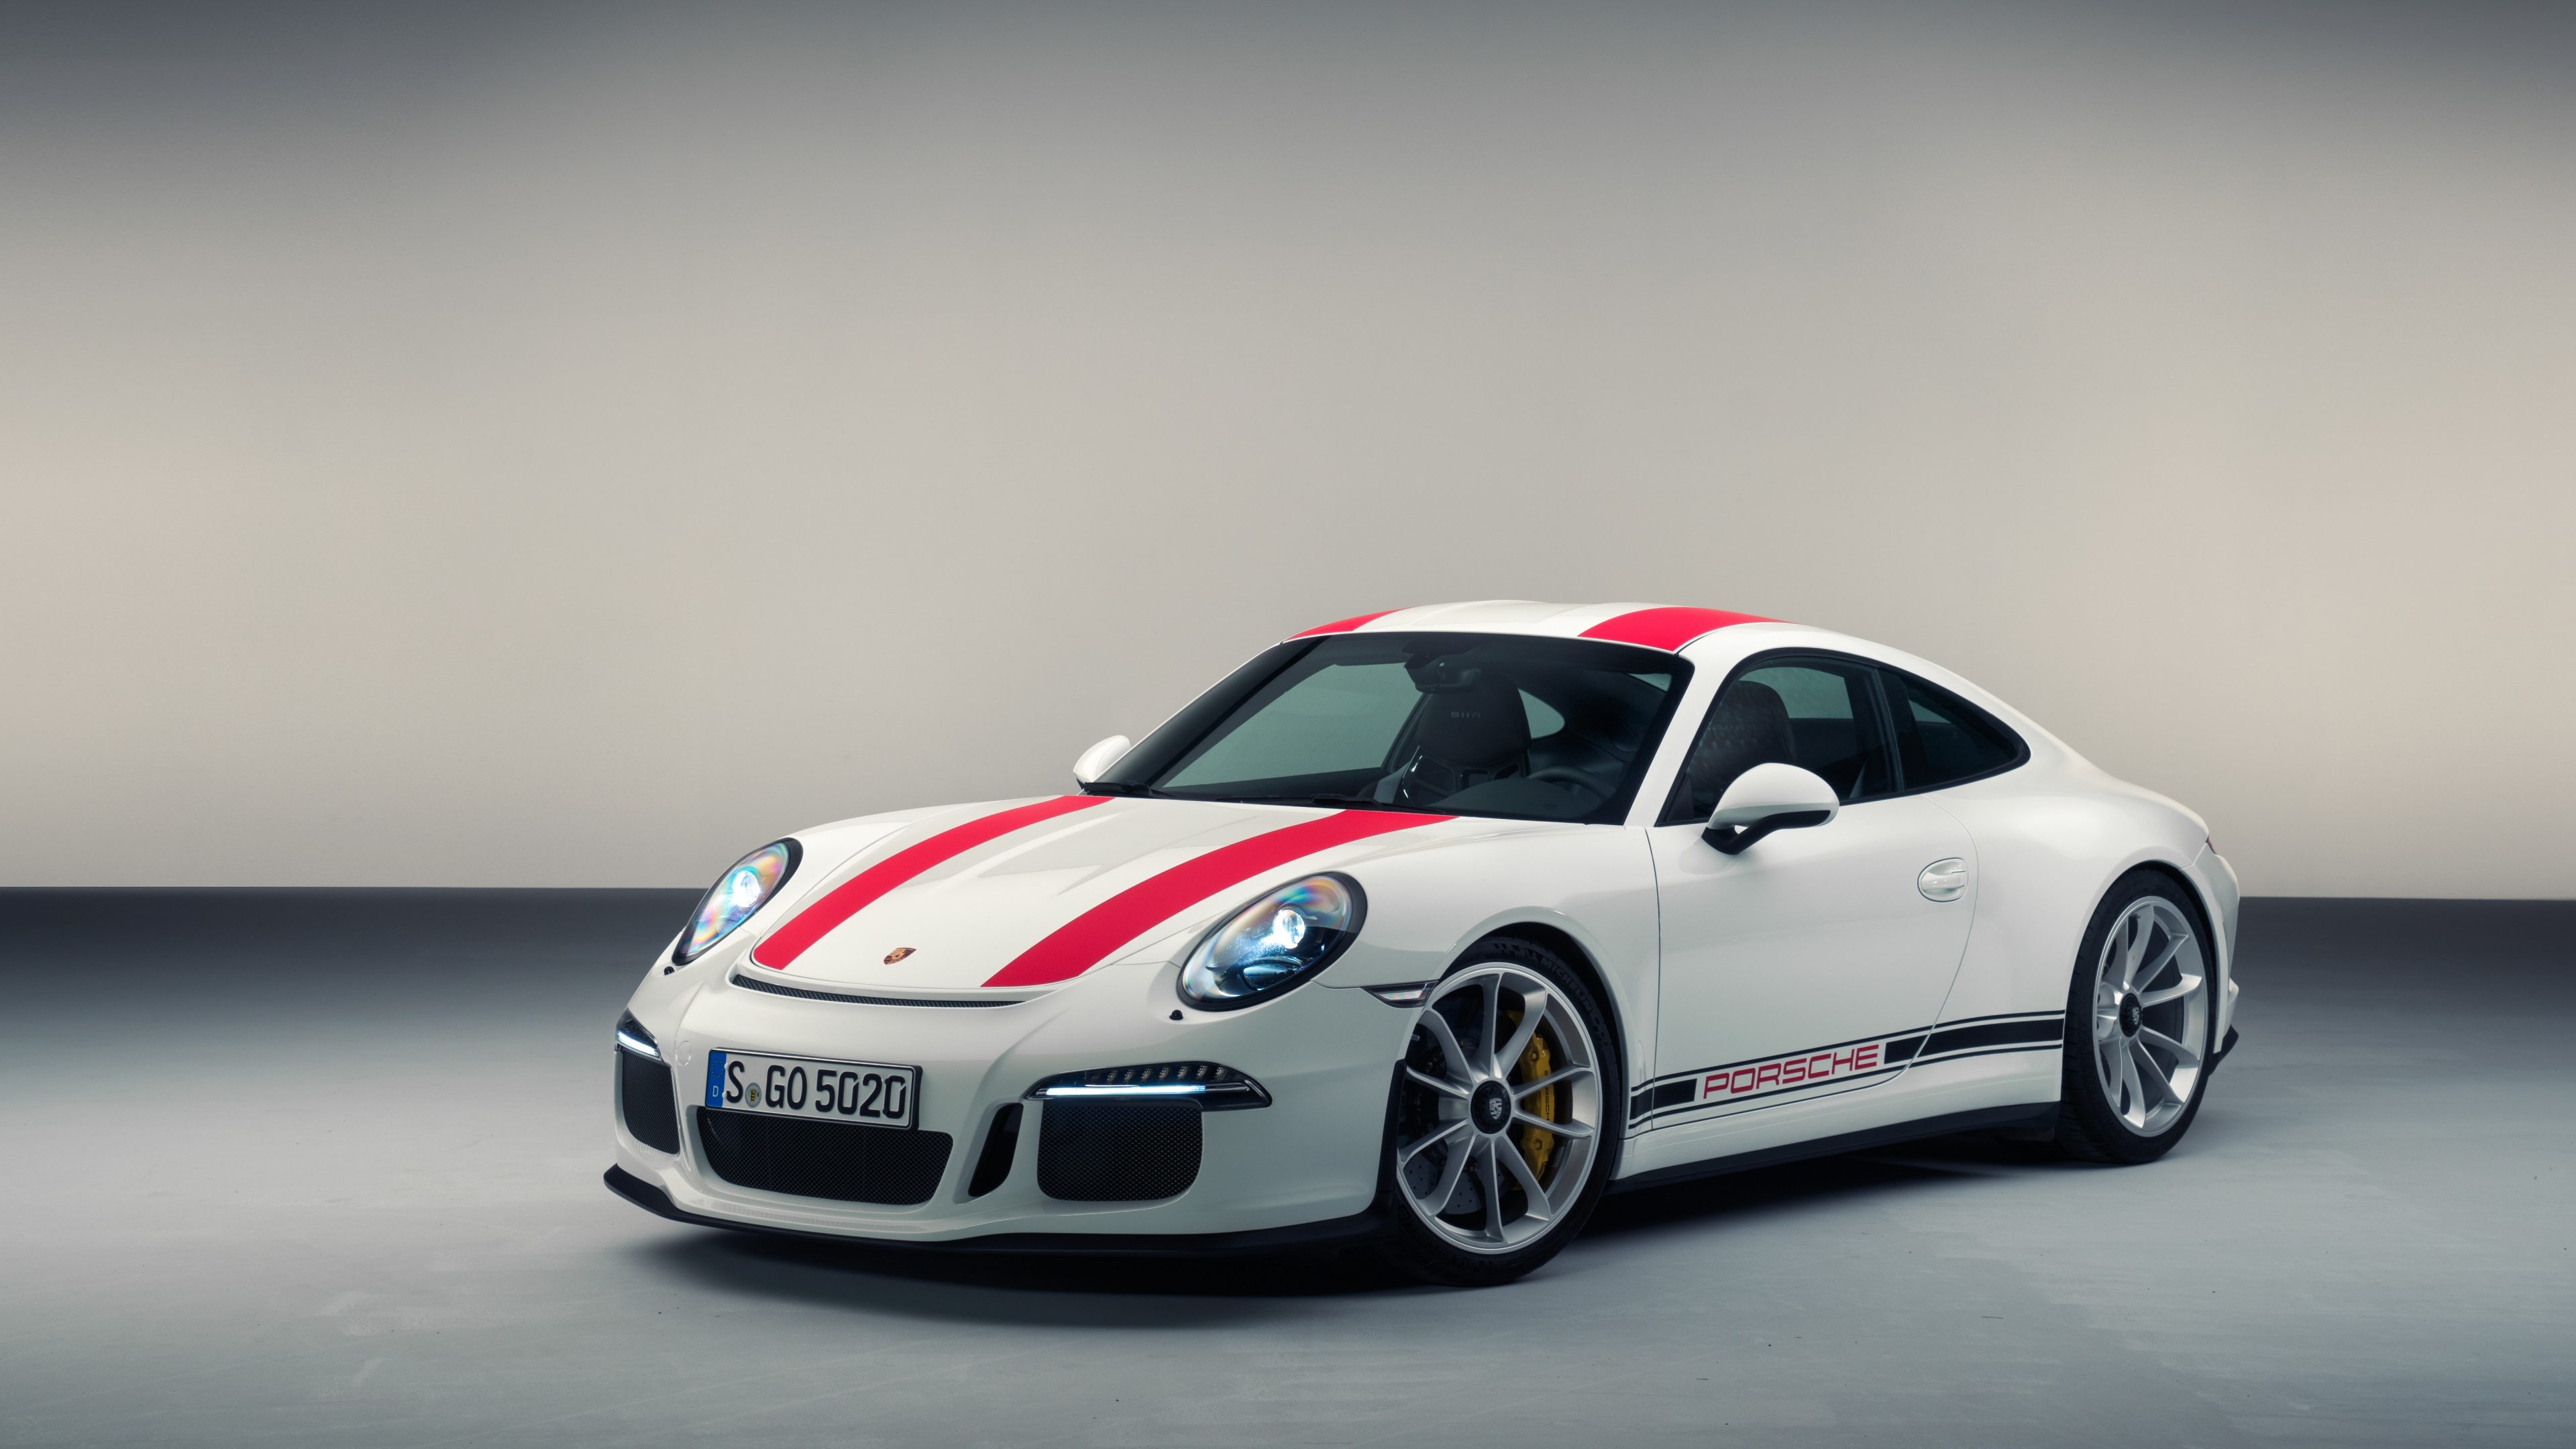 White and Red Porsche 911. Wallpaper in 3840x2160 Resolution